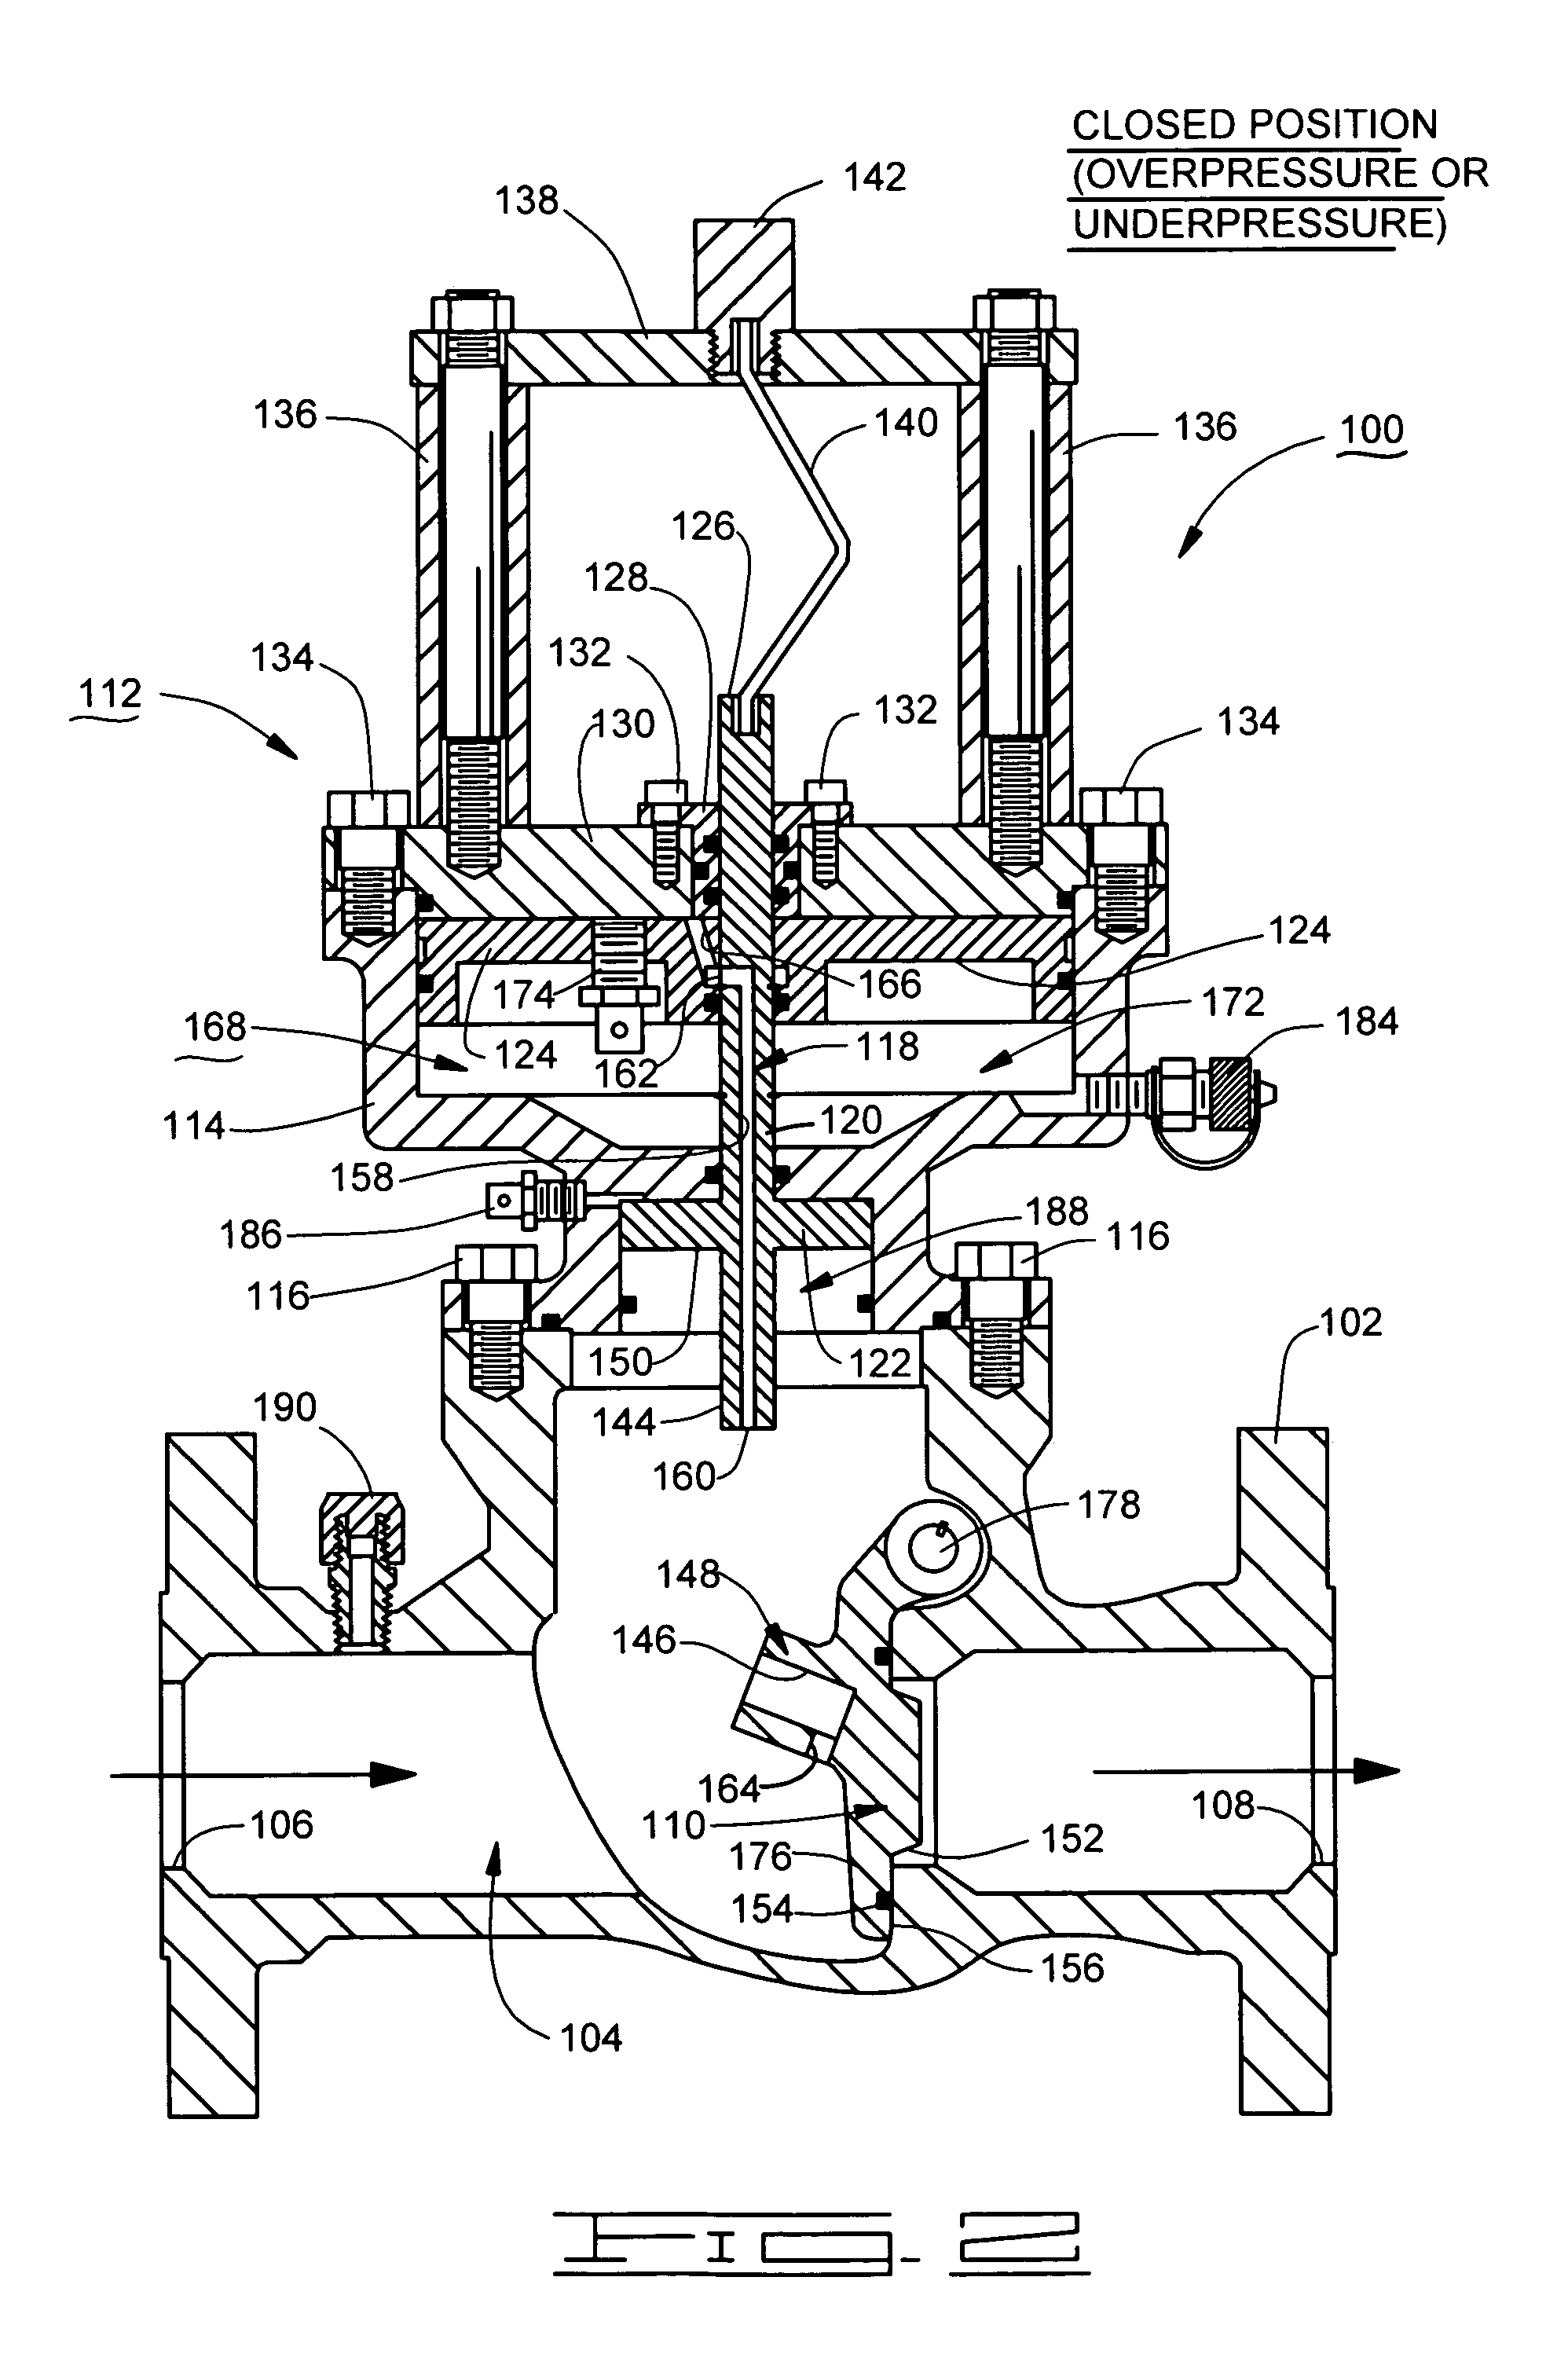 Valve activation assembly which mechanically collapses a collapsible member in response to both overpressure and underpressure conditions